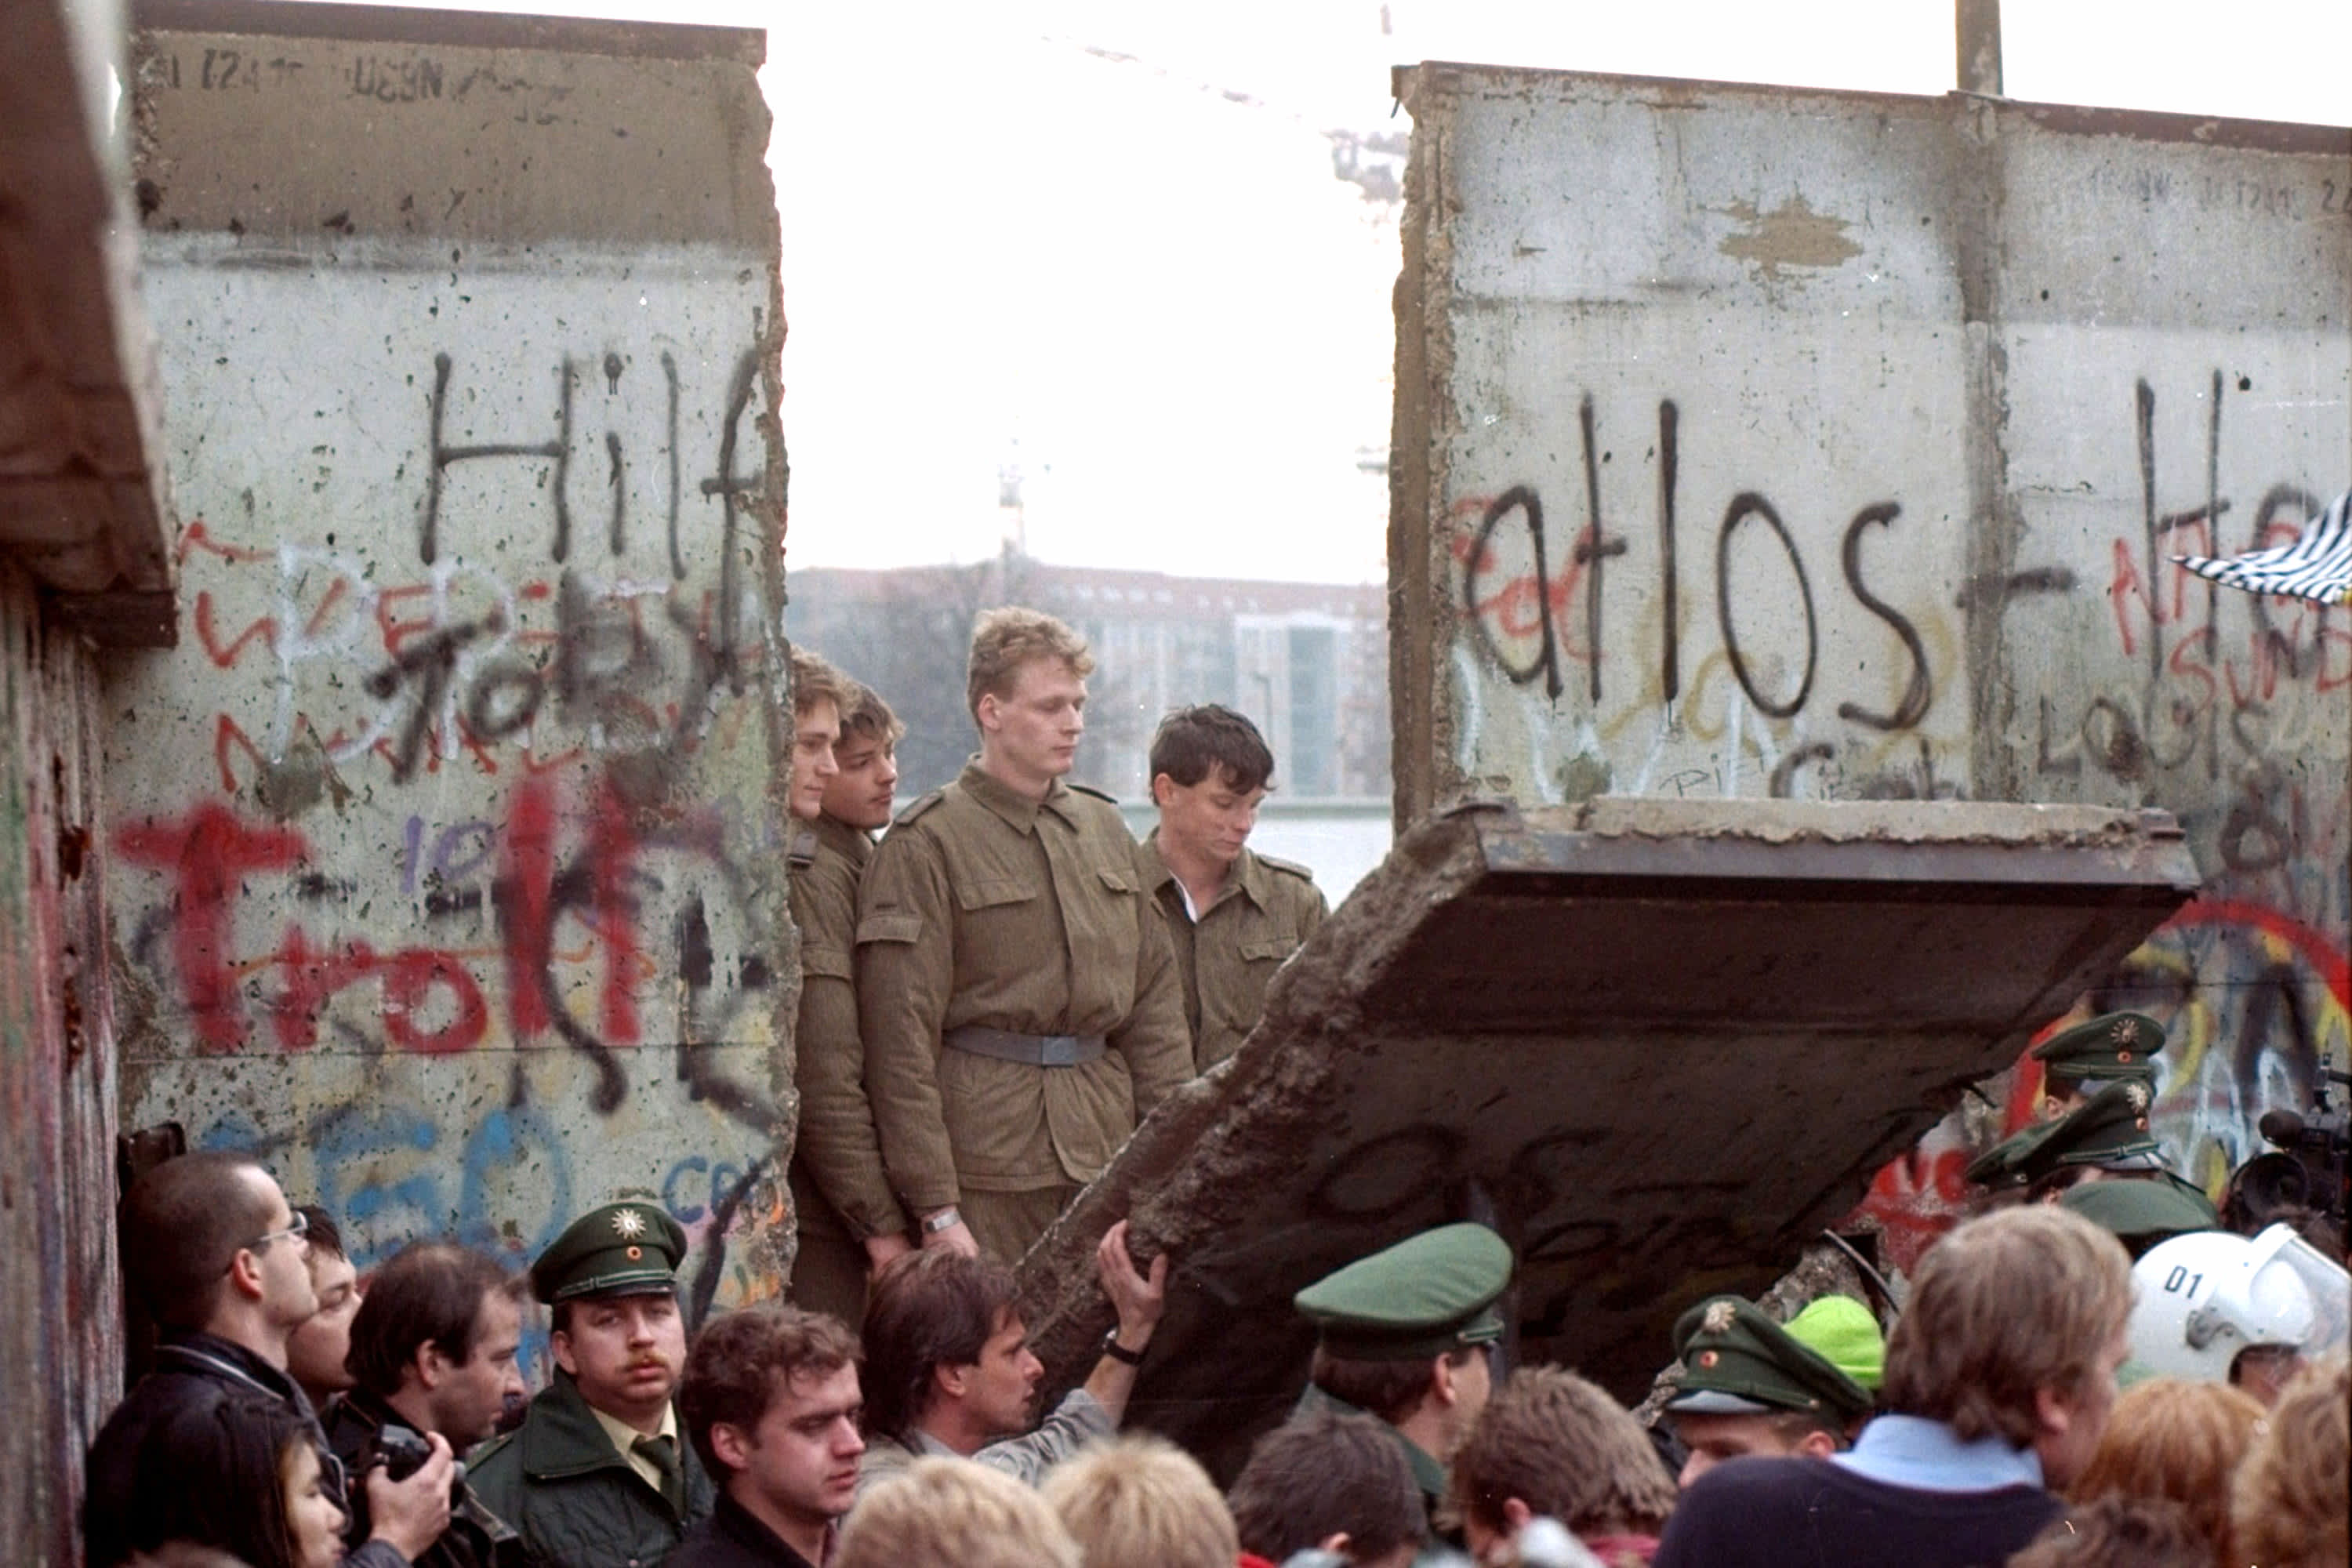 New World Order at risk 30 years after Berlin Wall fell